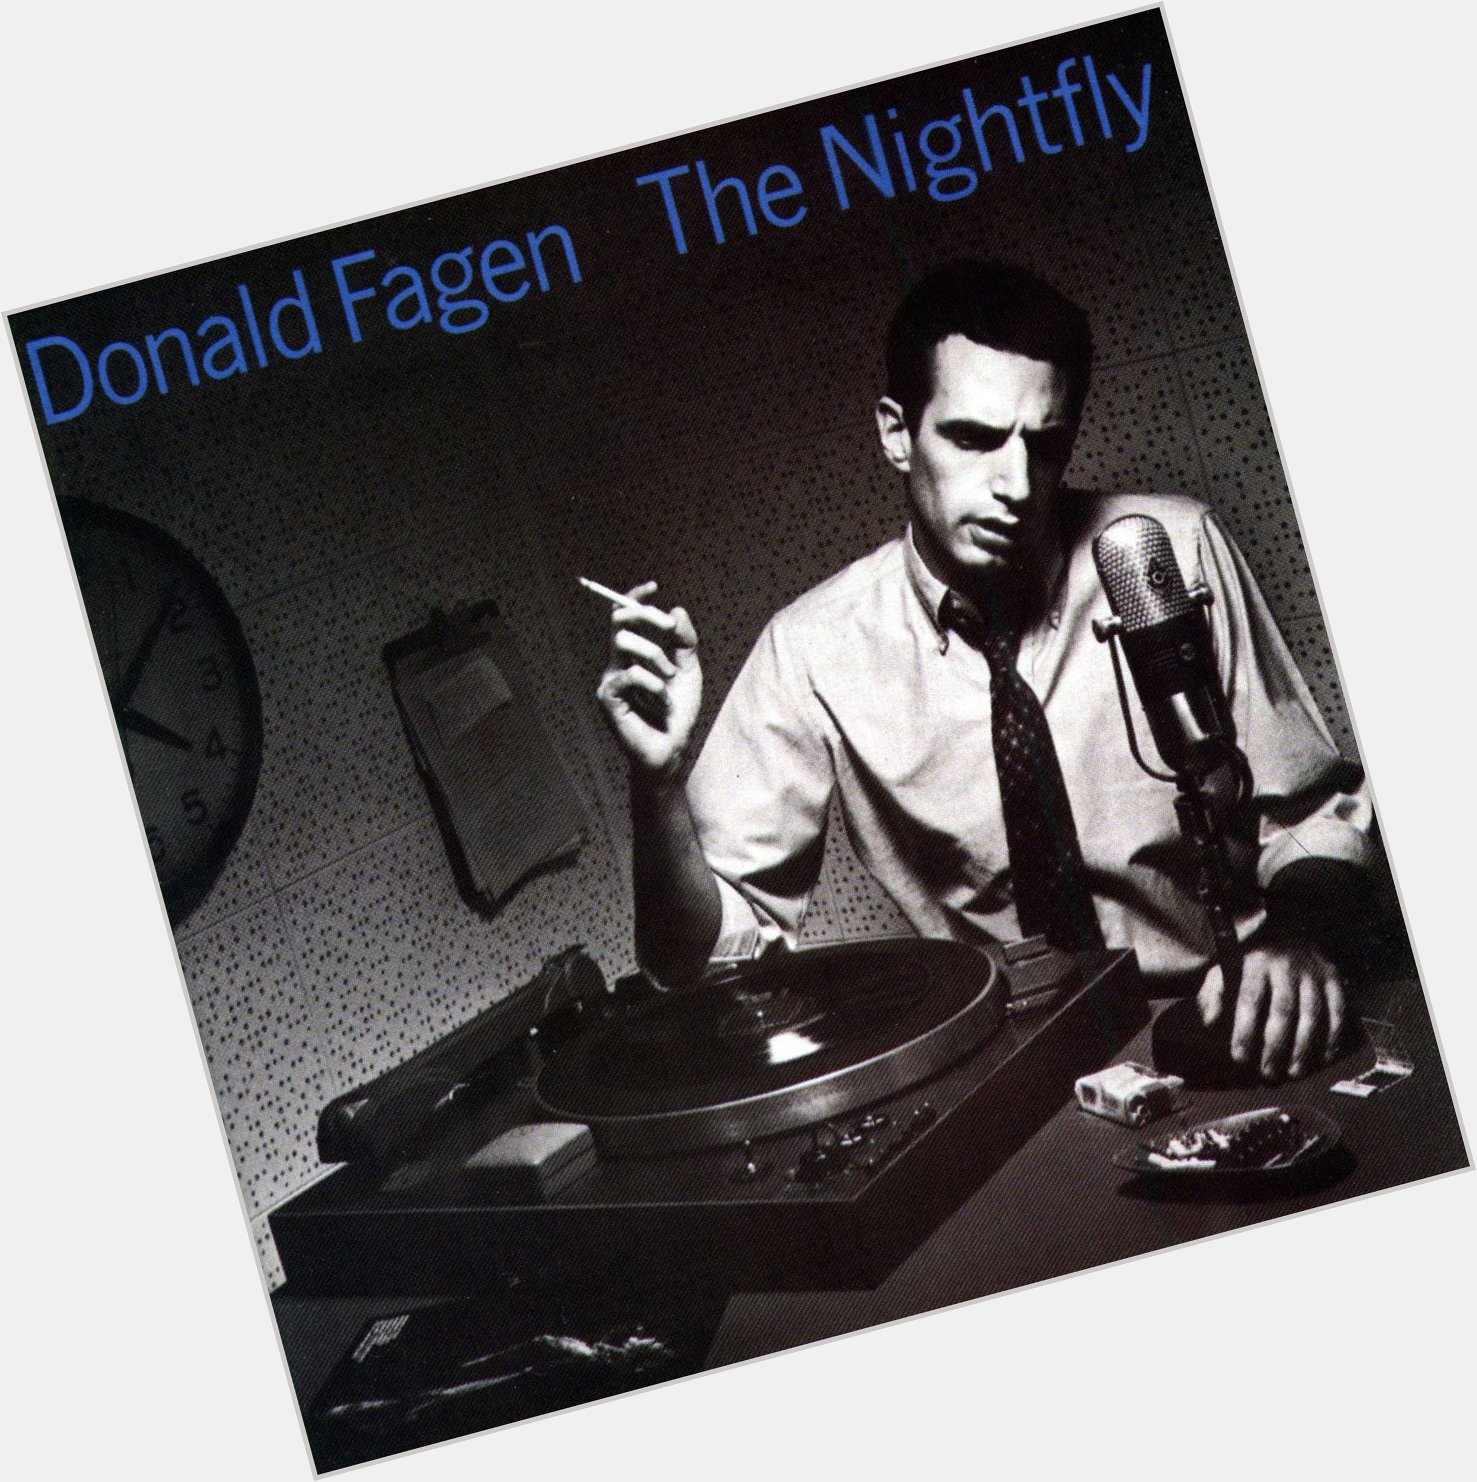 Happy 75th birthday to the king Donald Fagen, who only has four solo albums but each one has a perfect cover 